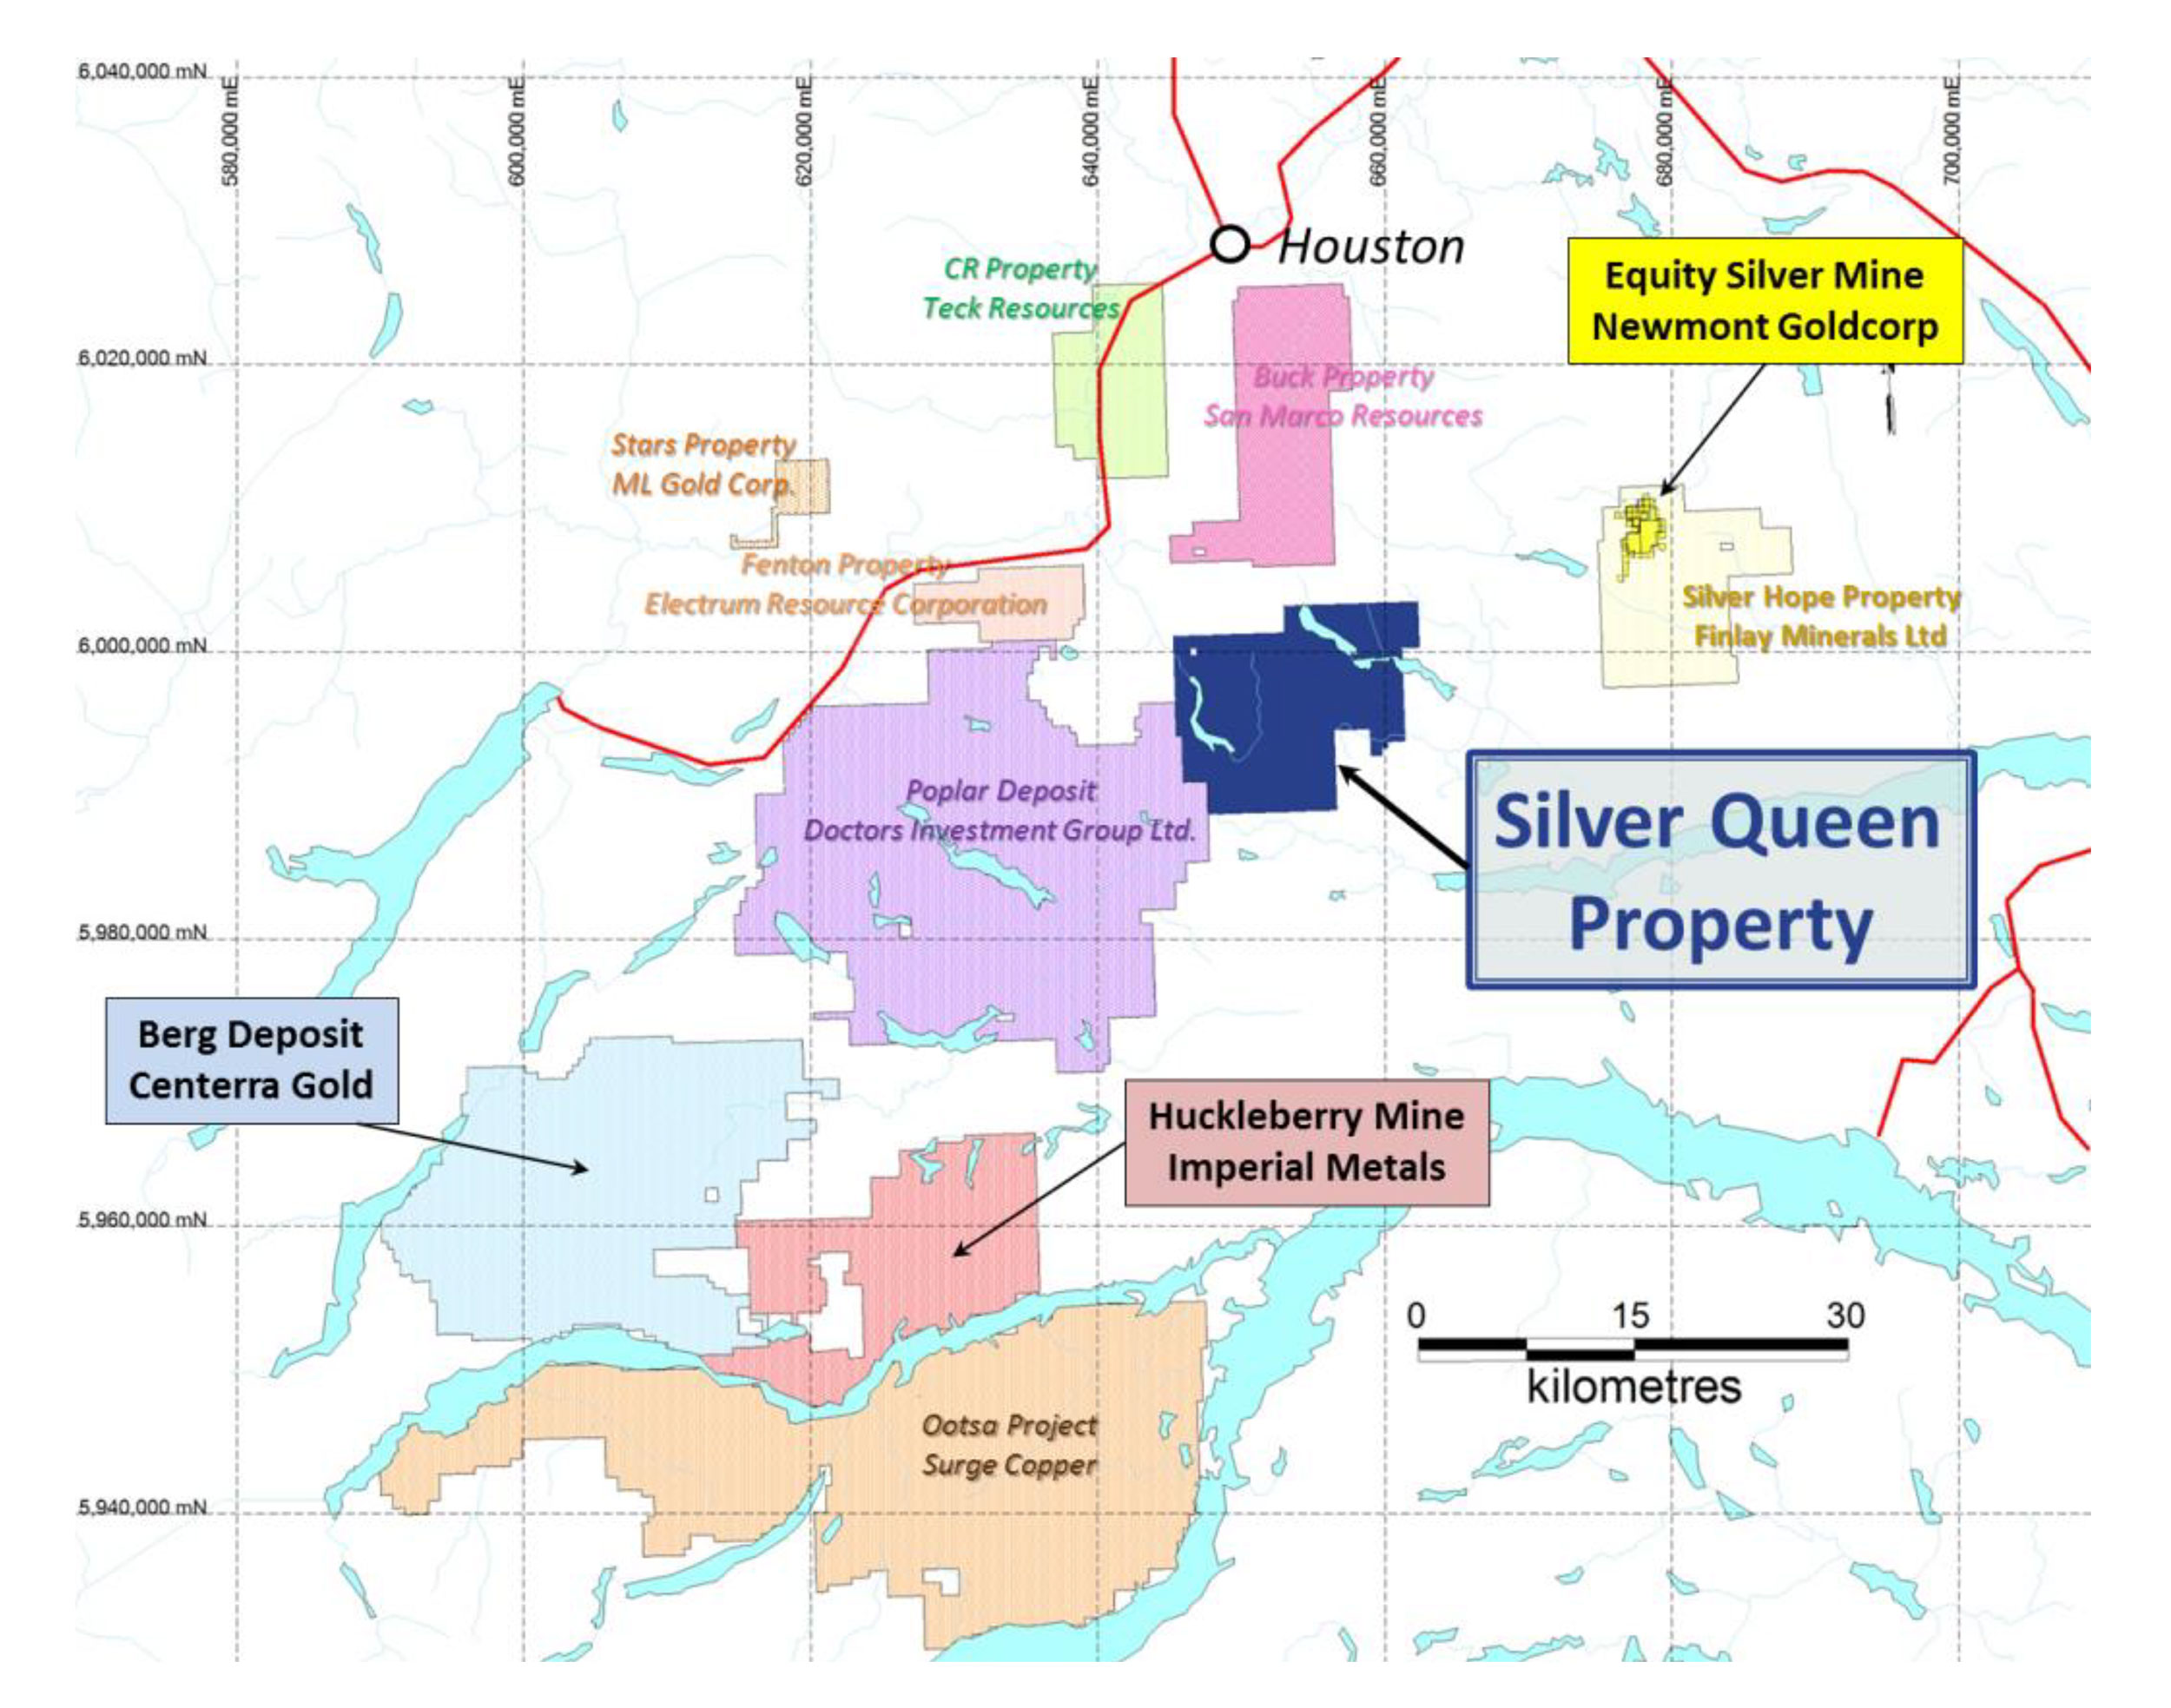 Silver Queen Location and Infrastructure